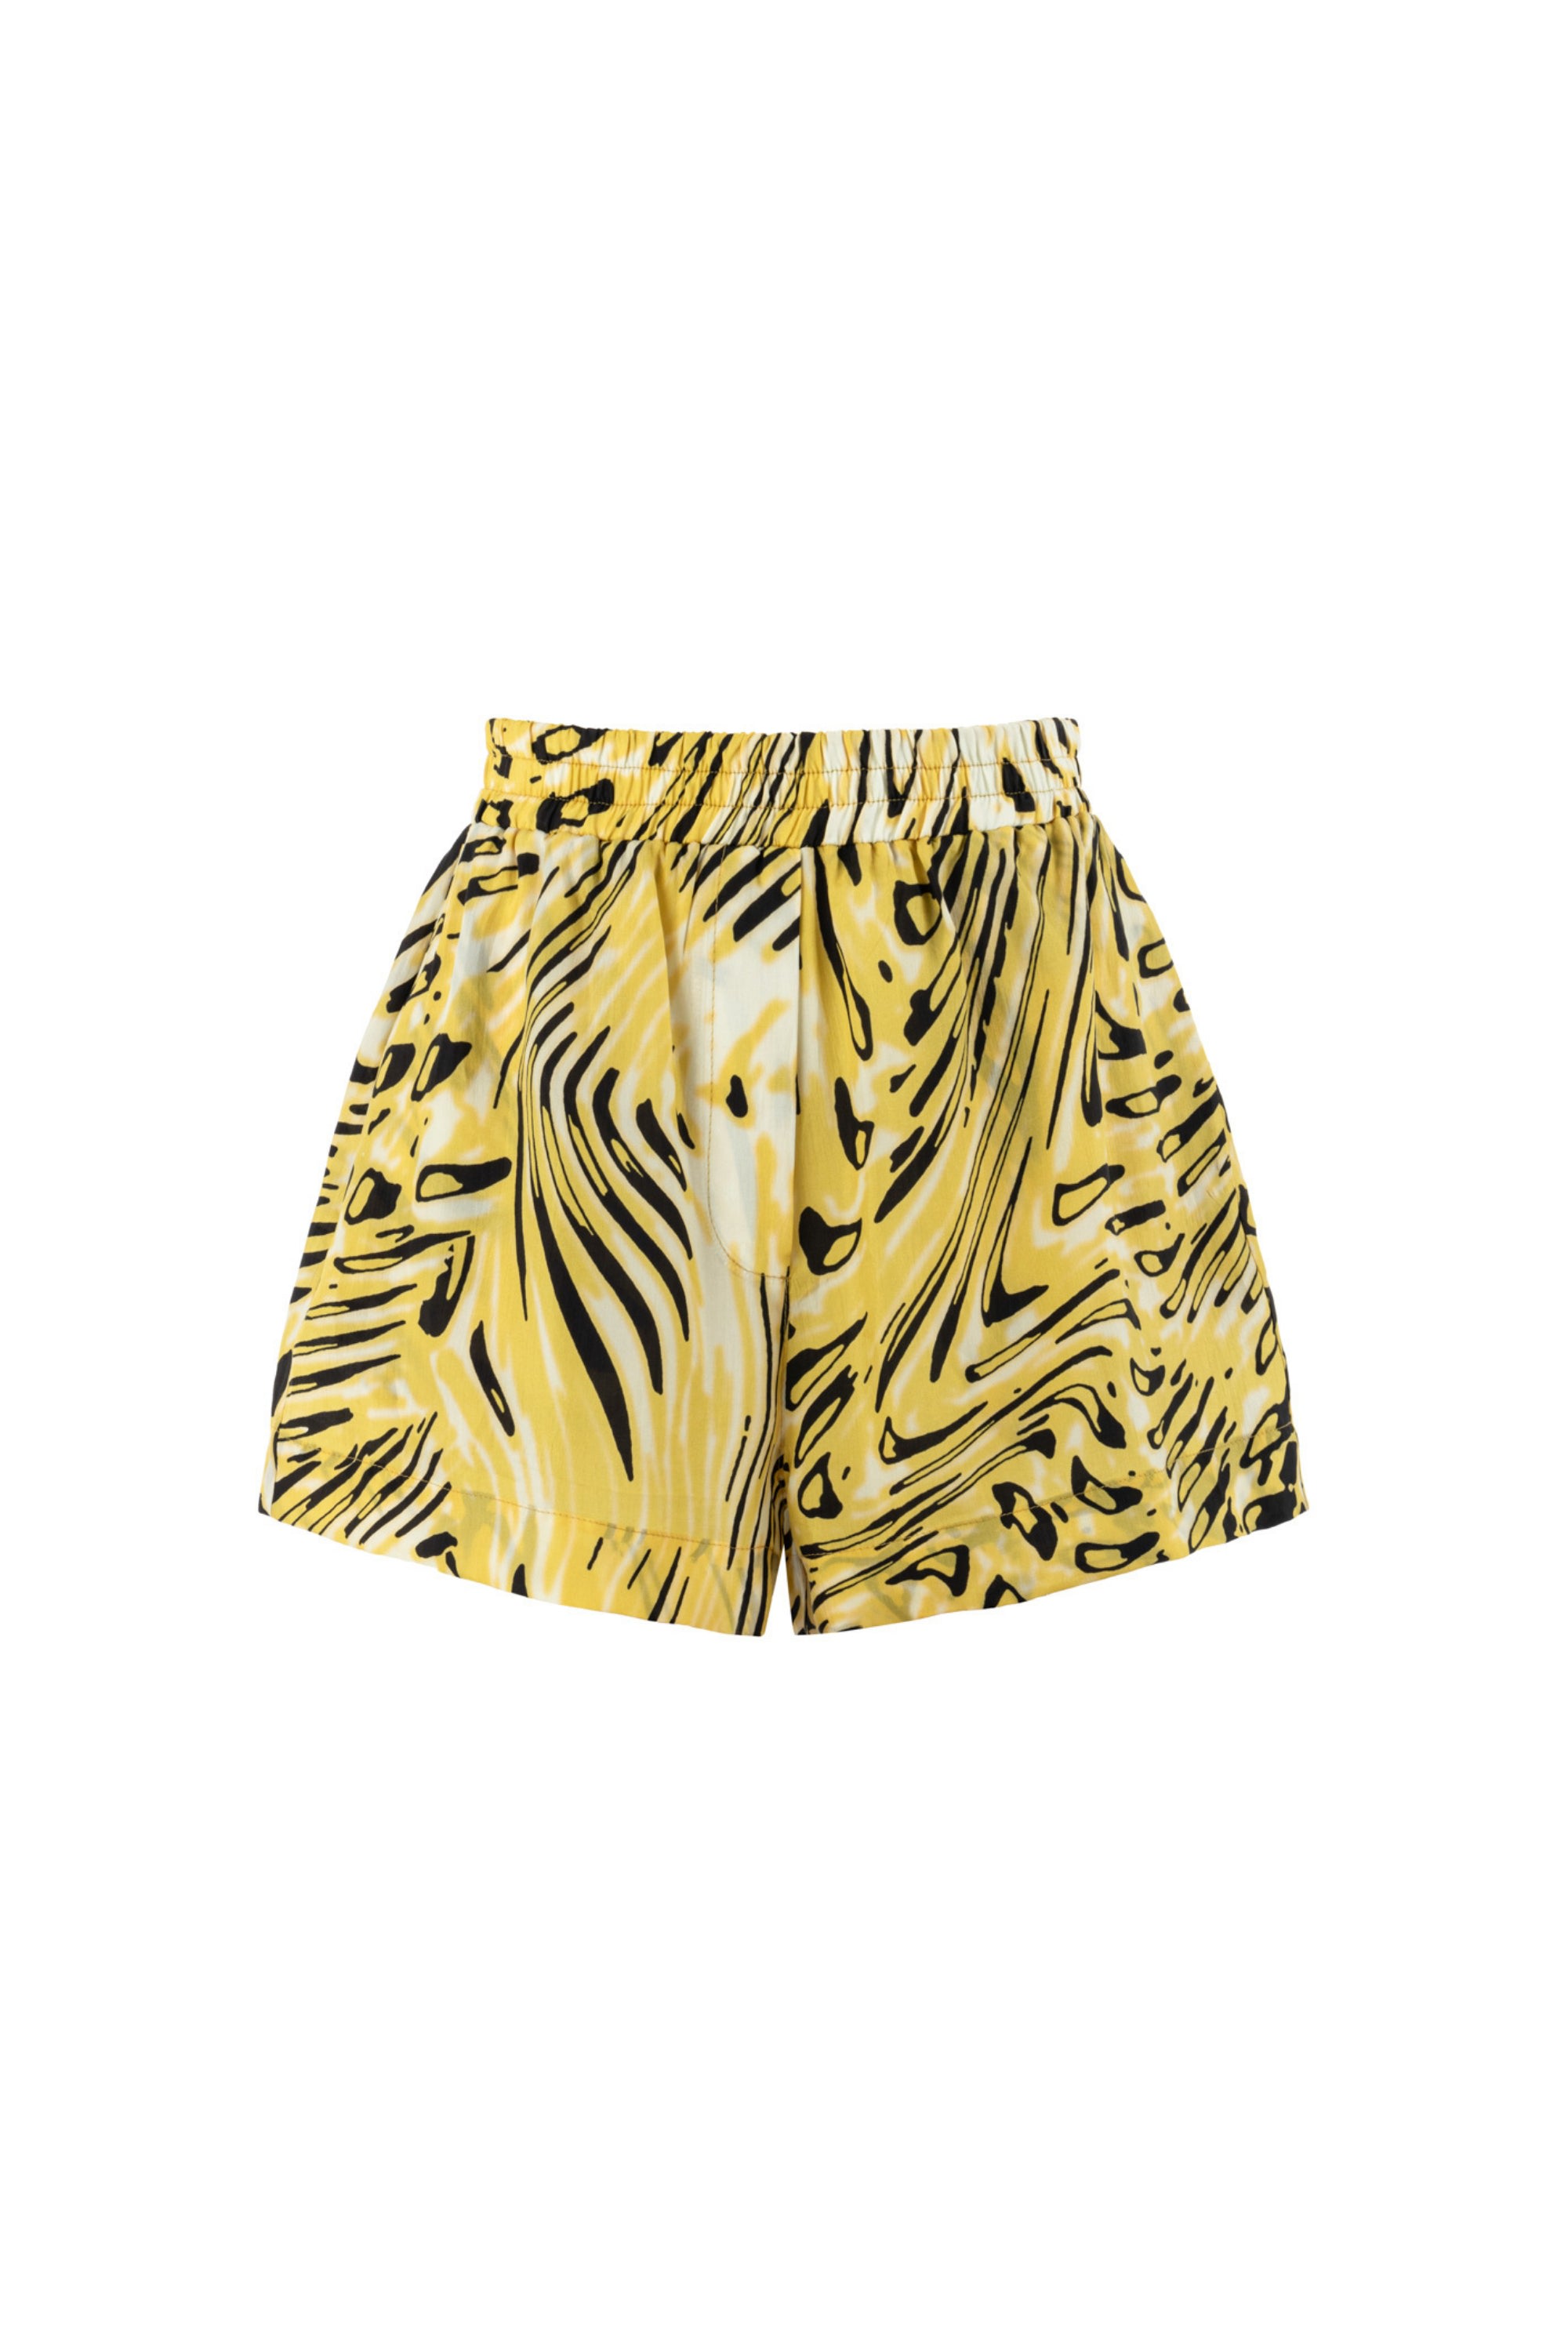 Yellow / Orange High Waist Printed Shorts Extra Small Nocturne